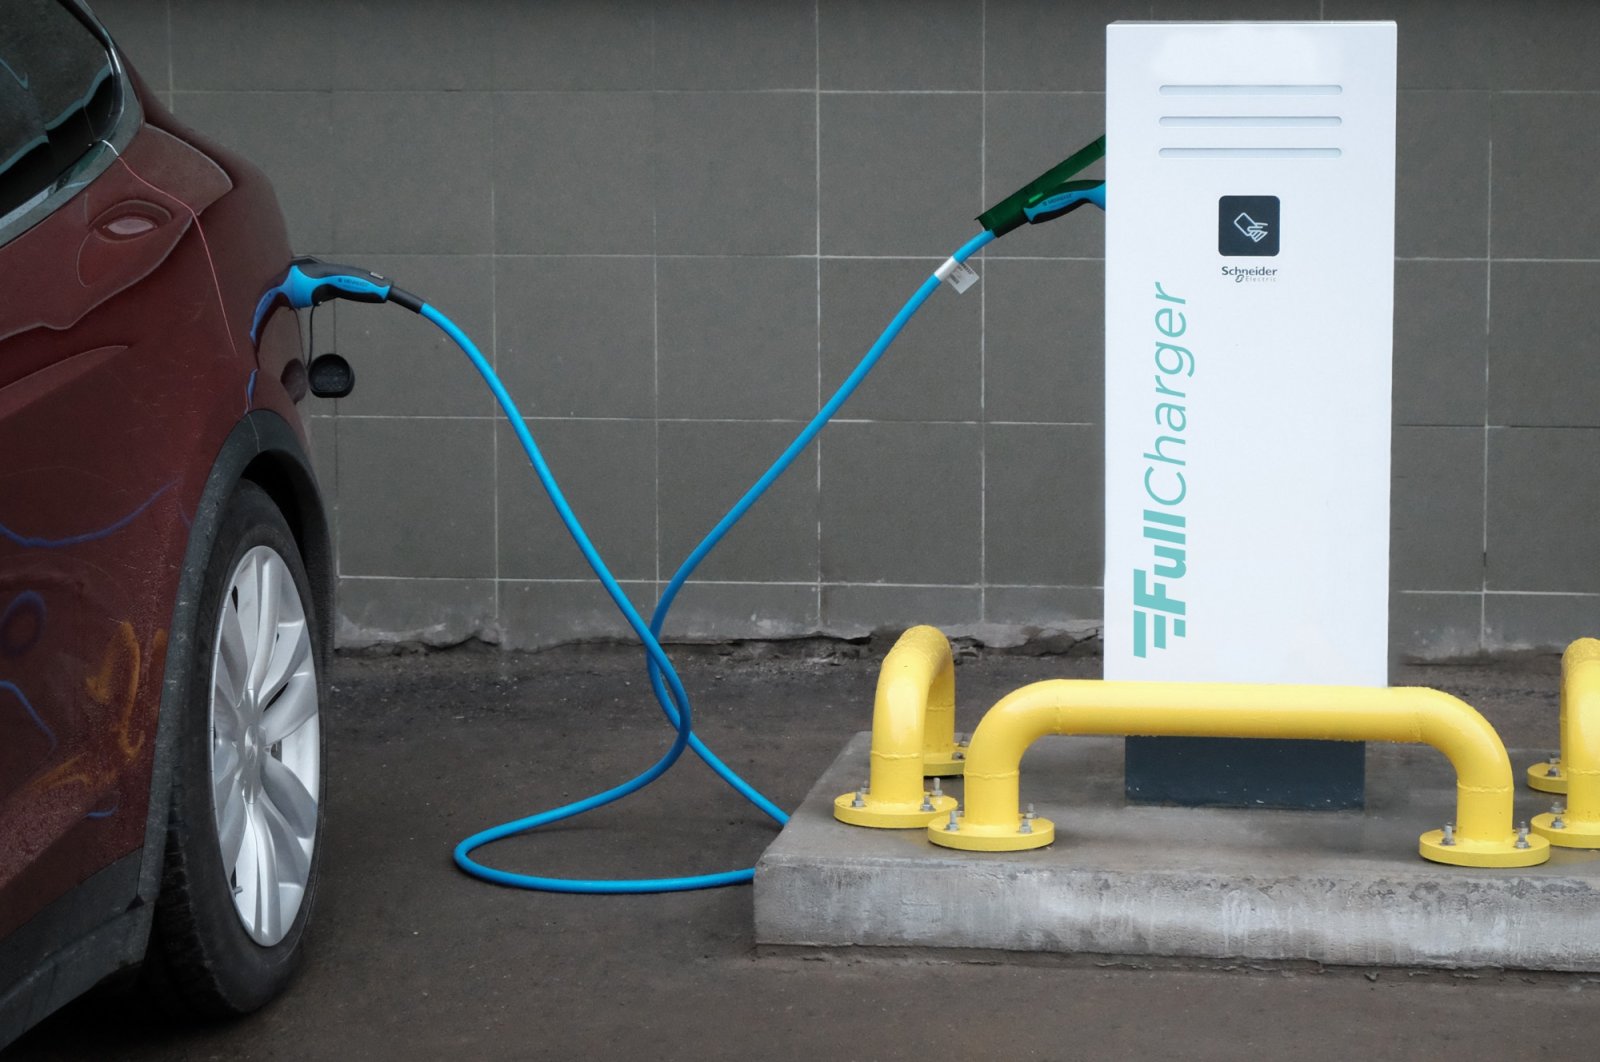 The number of electric vehicle charging units in Turkey is estimated to reach 54,000 in 2023, before folding to 1.1 million by 2030 and 4.8 million by 2040. (Courtesy of Schneider Electric)